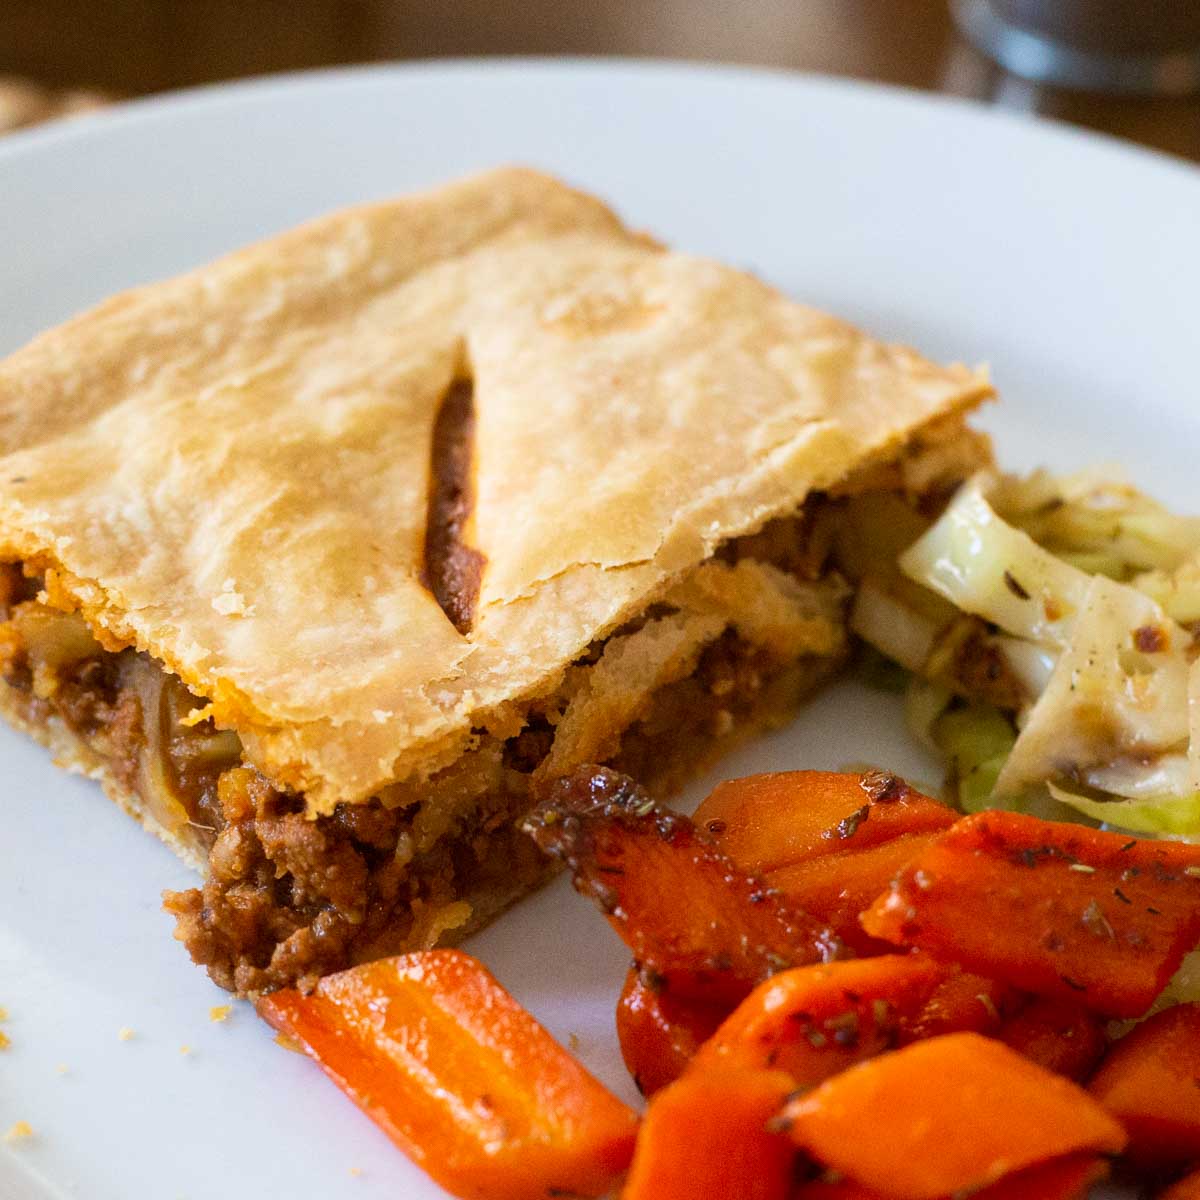 A square of Irish meat pie on a plate with carrots and cabbage.